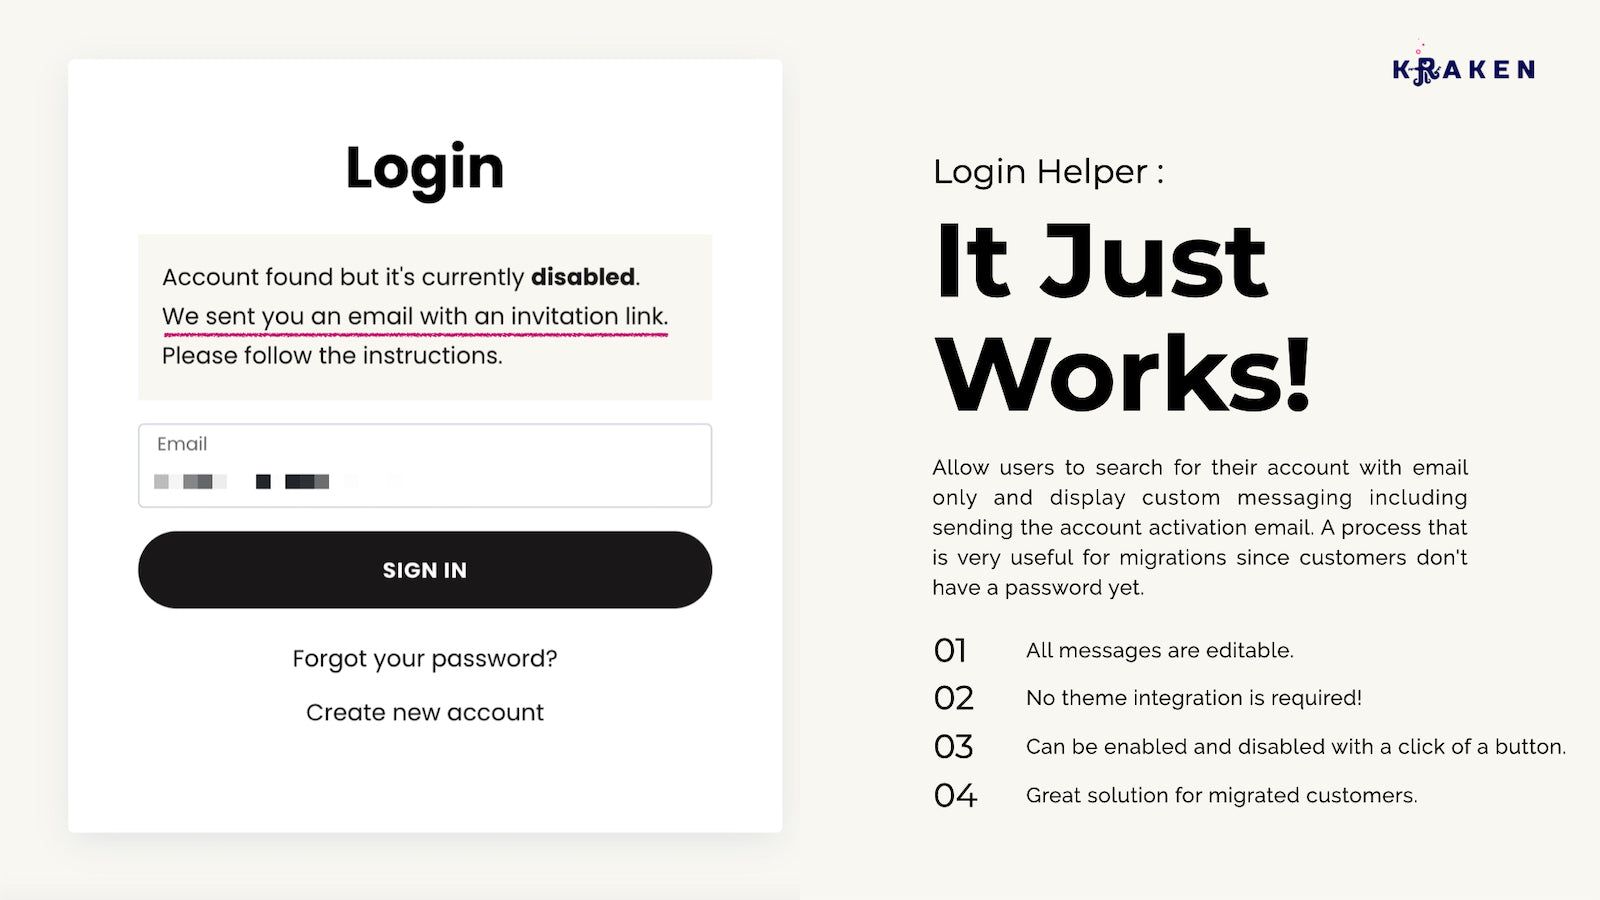 Login Helper - allow users to log in with only email address.